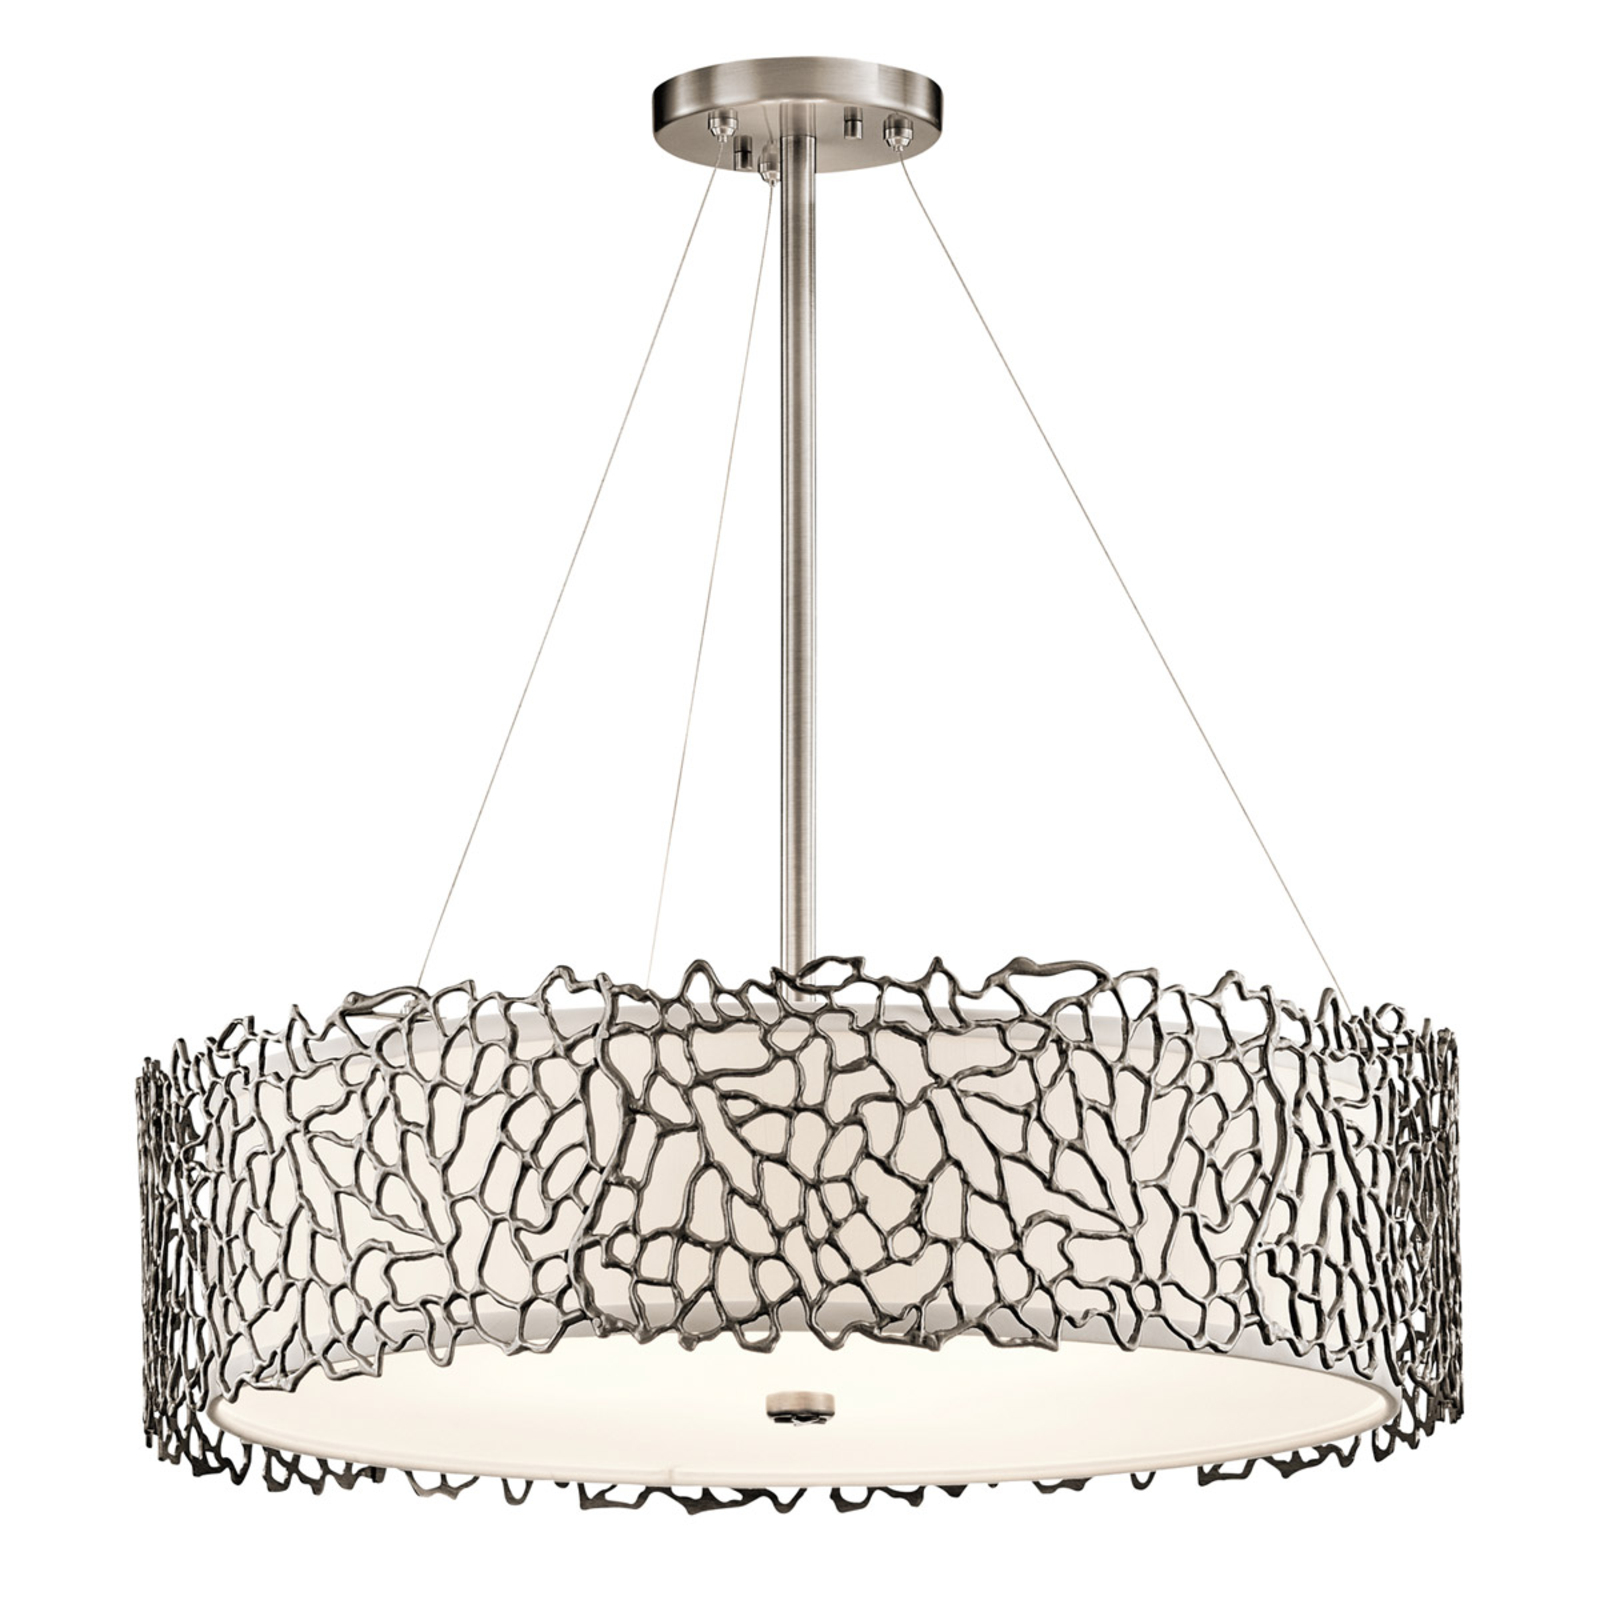 Silver Coral hanging light, 55.9 cm